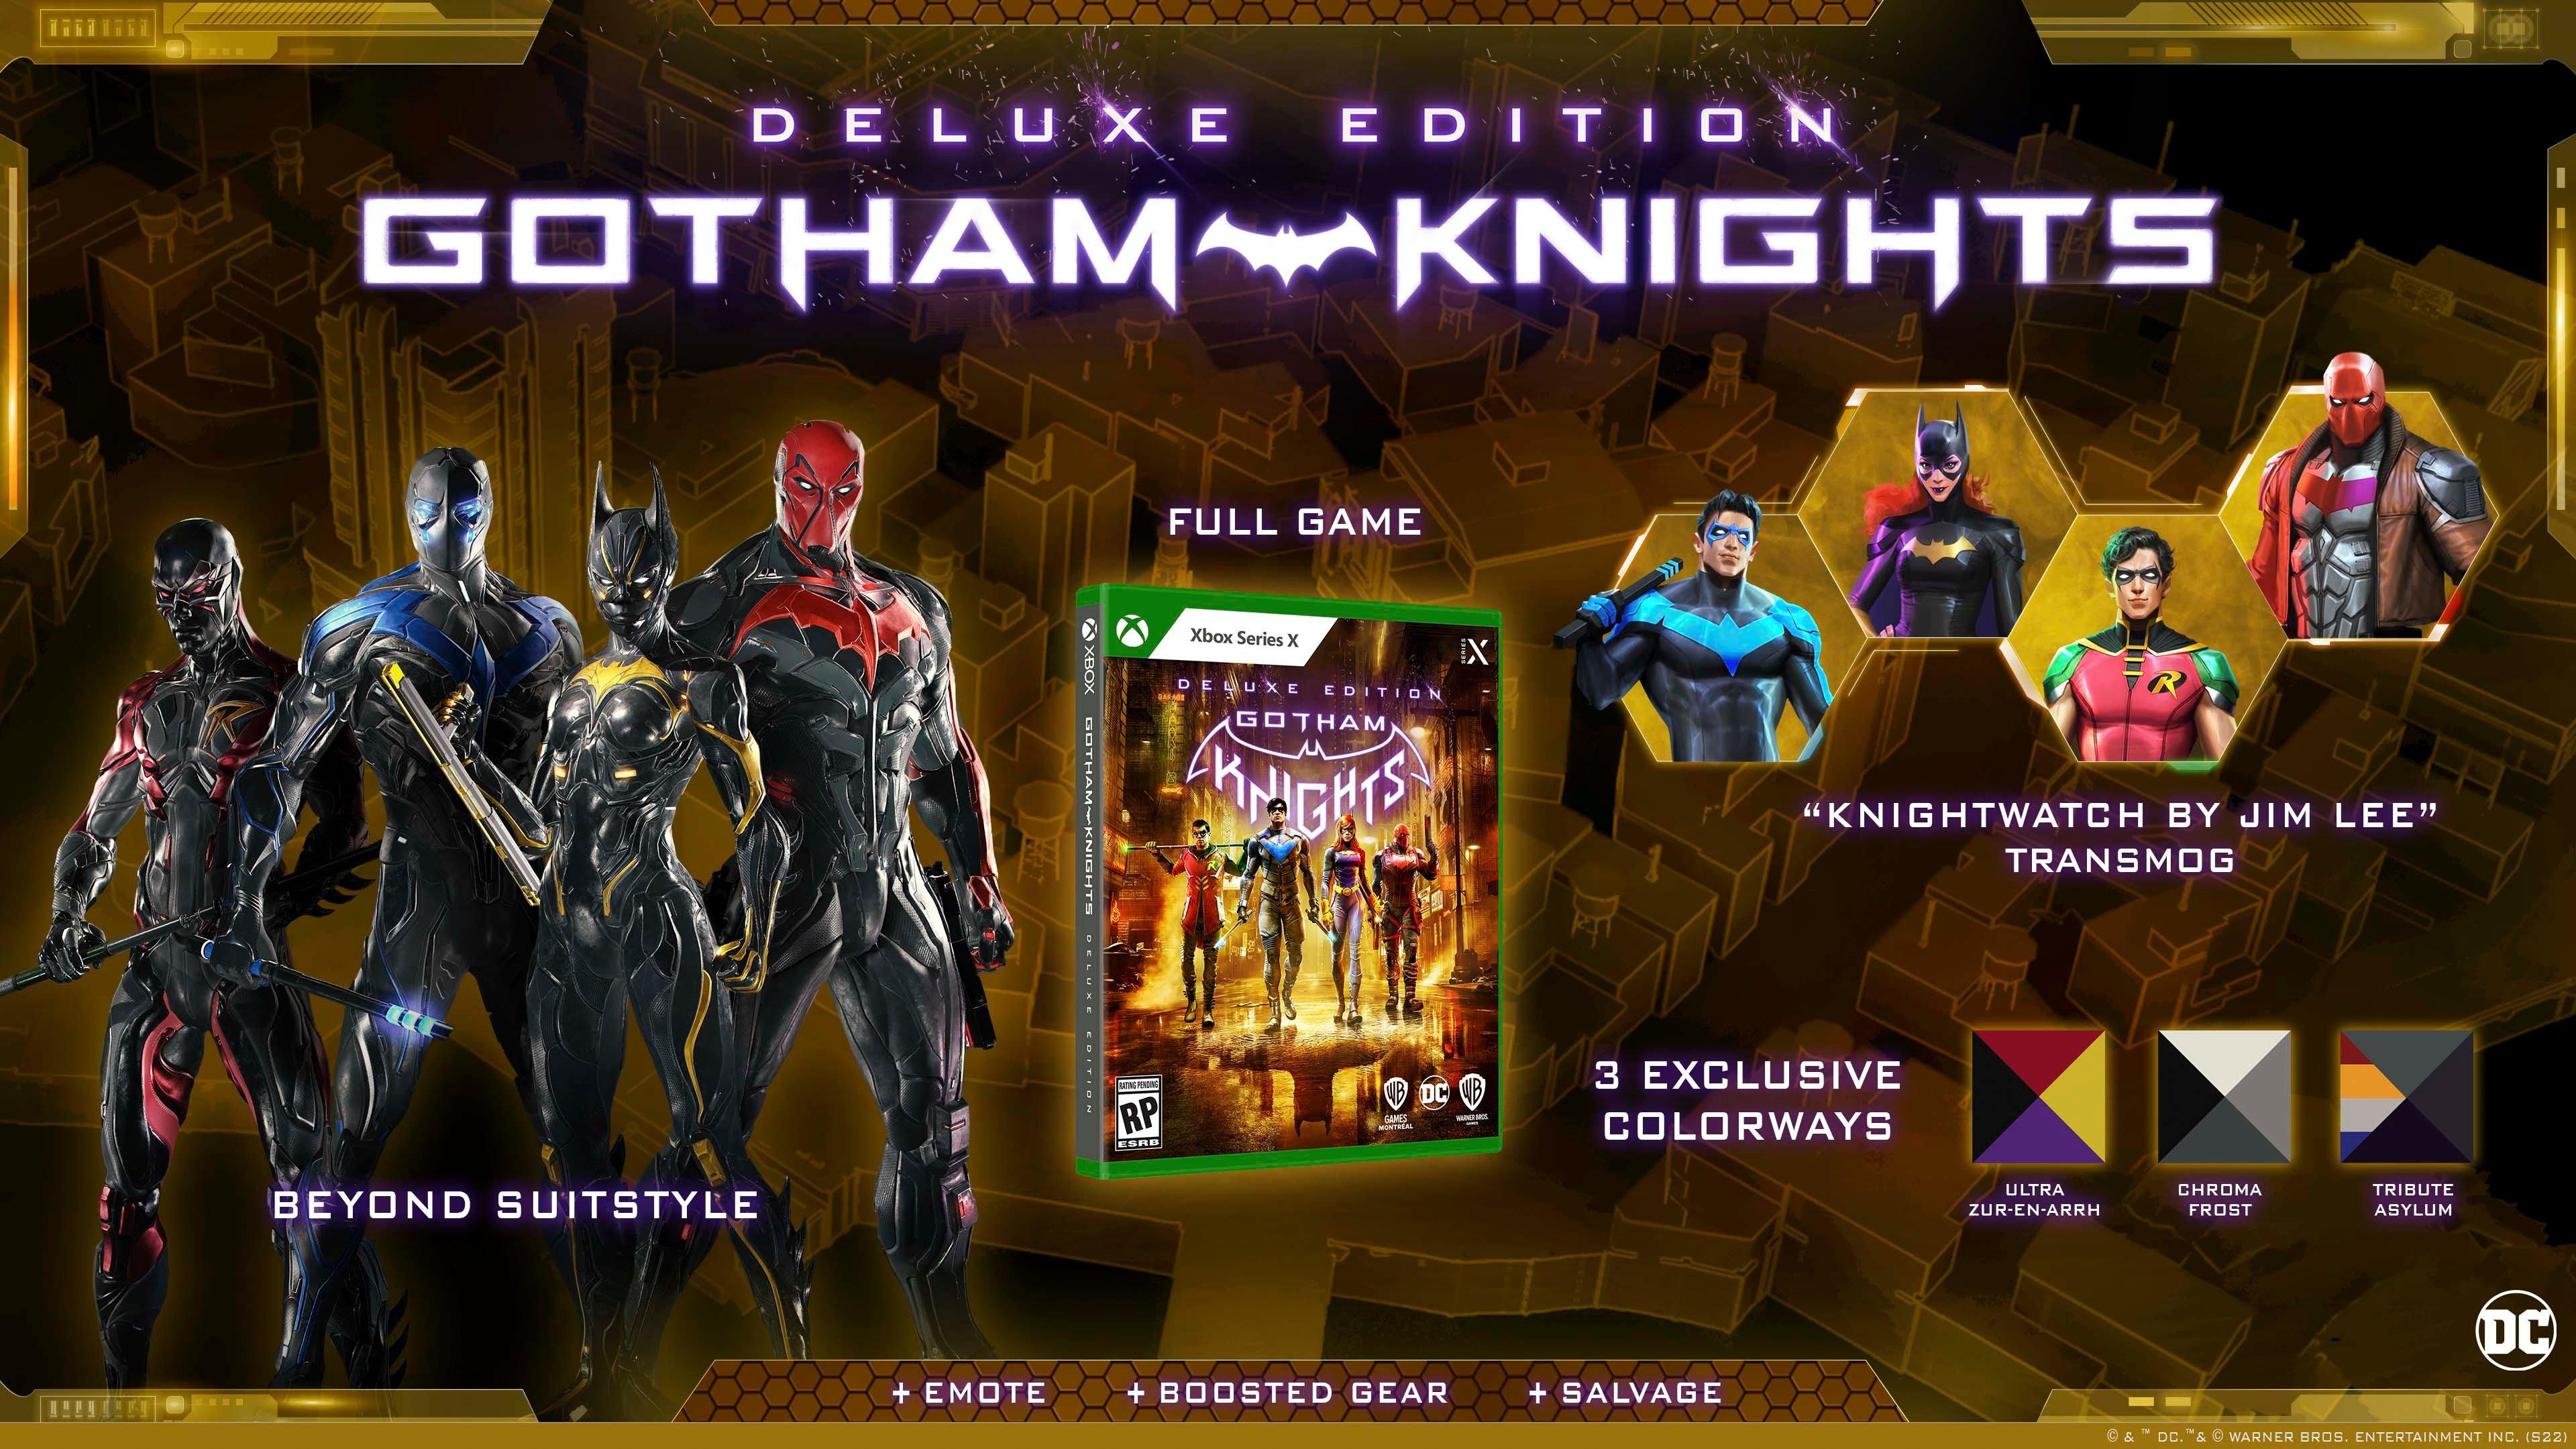 Gotham Knights Deluxe Edition - Xbox Series X, Xbox Series X